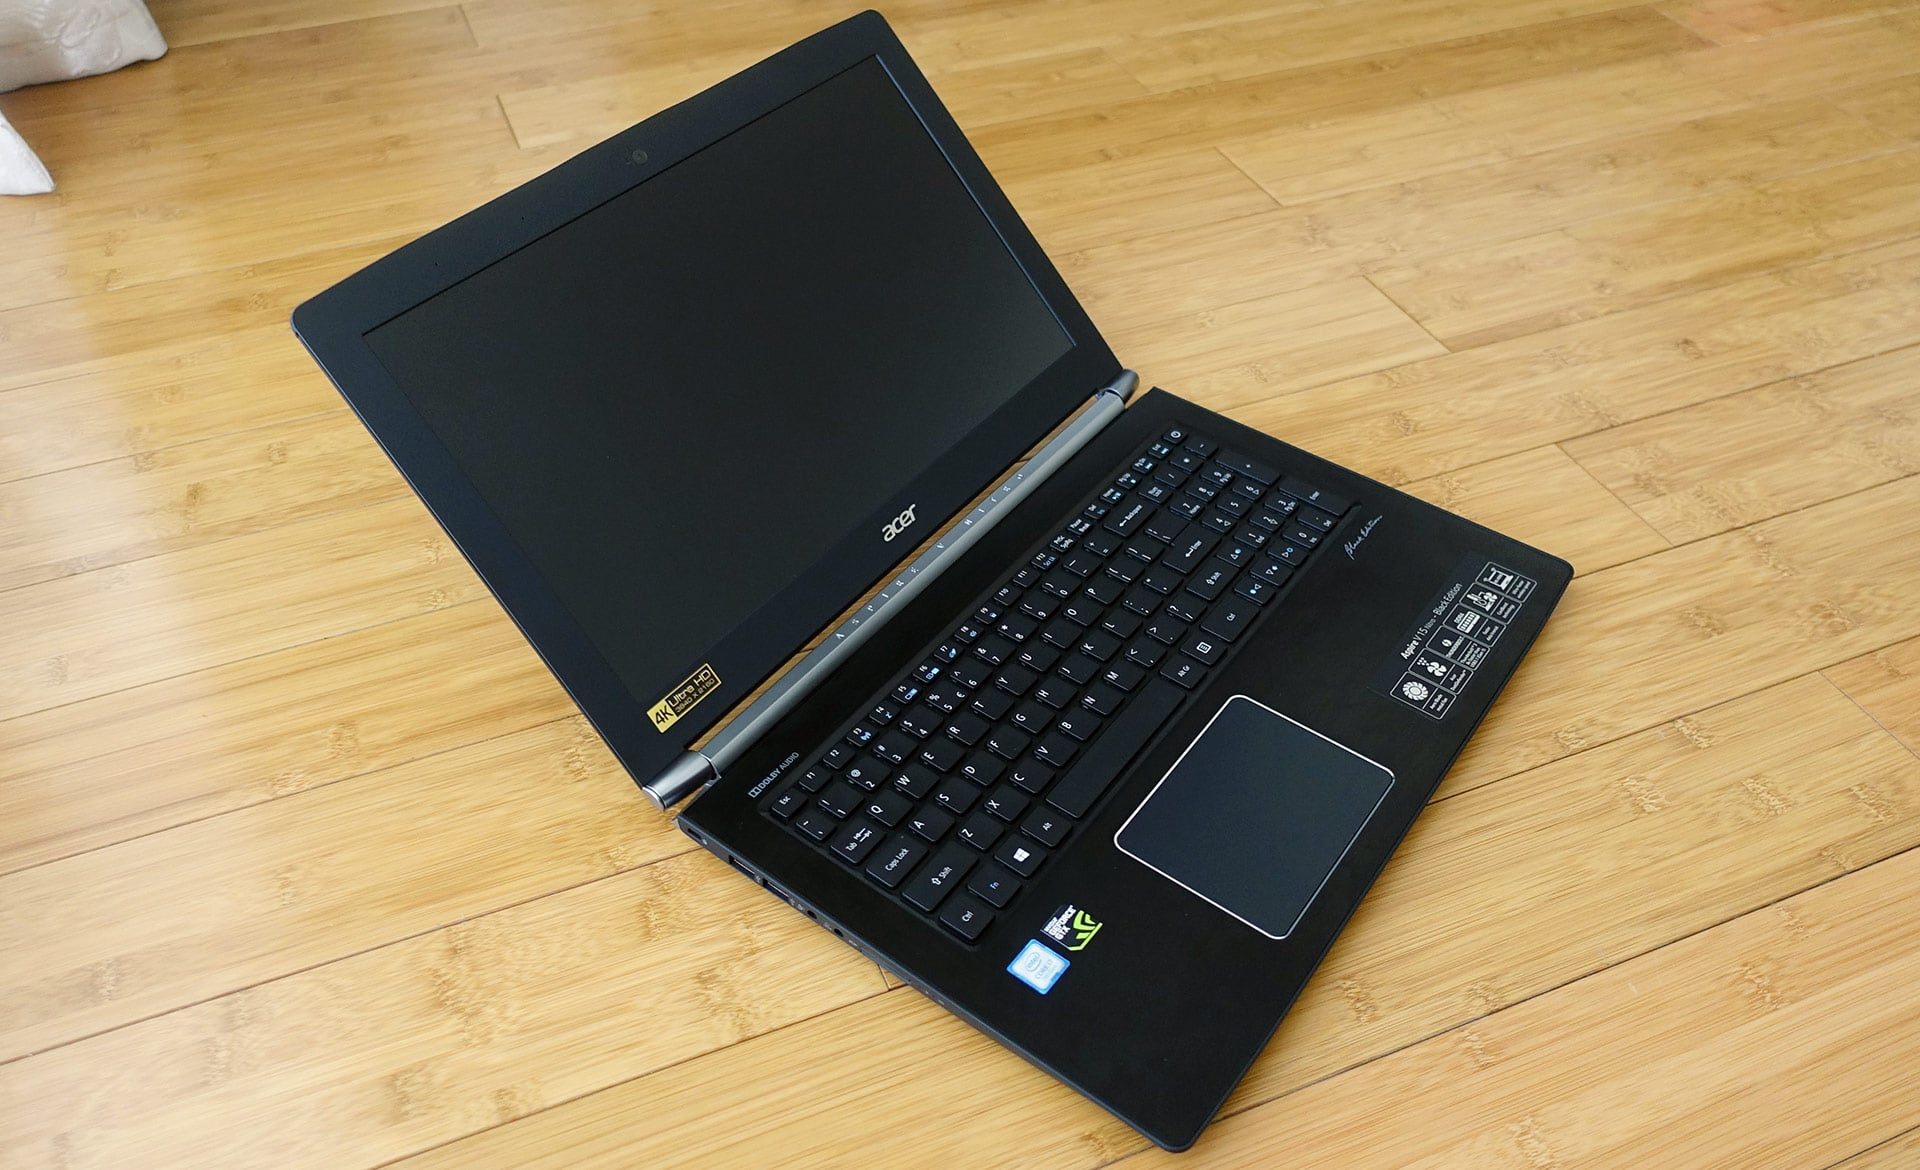 The Aspire V15 Nitro Black Edition is one of the better 15-inch multimedia laptops of the moment